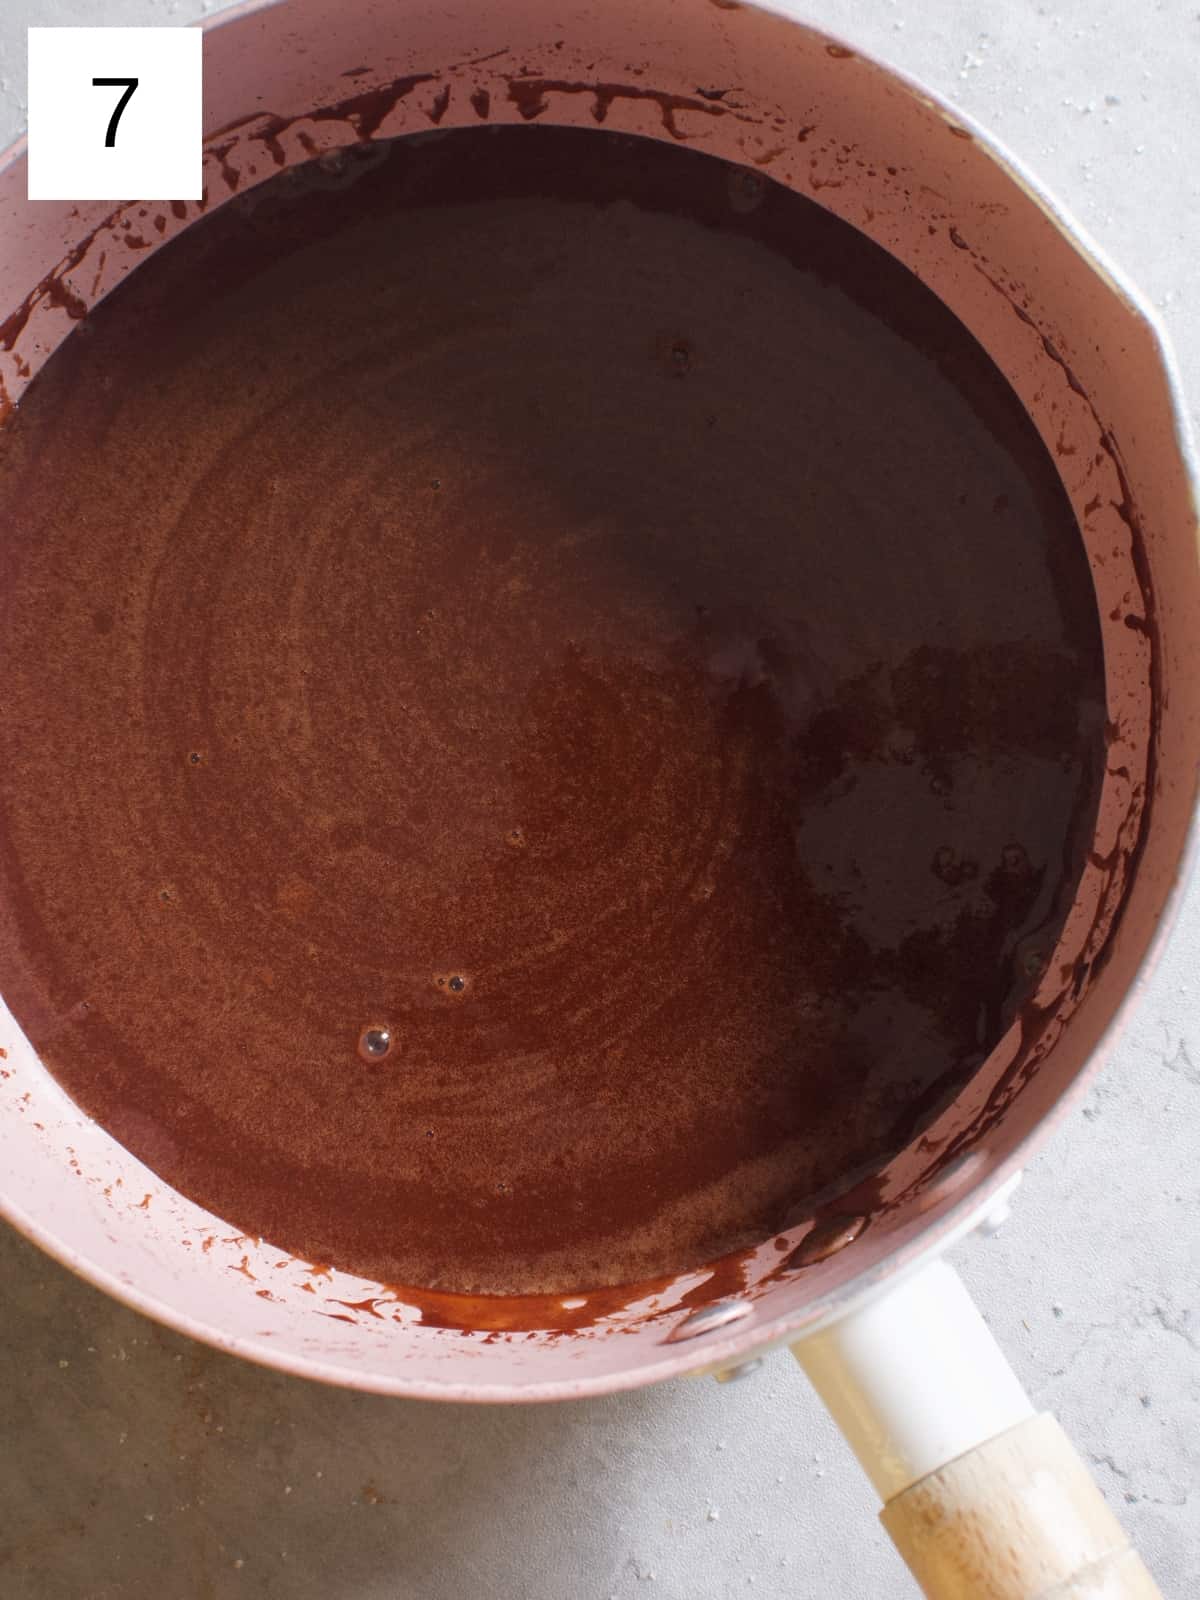 Cooled cocoa mixture in a sauce pan.